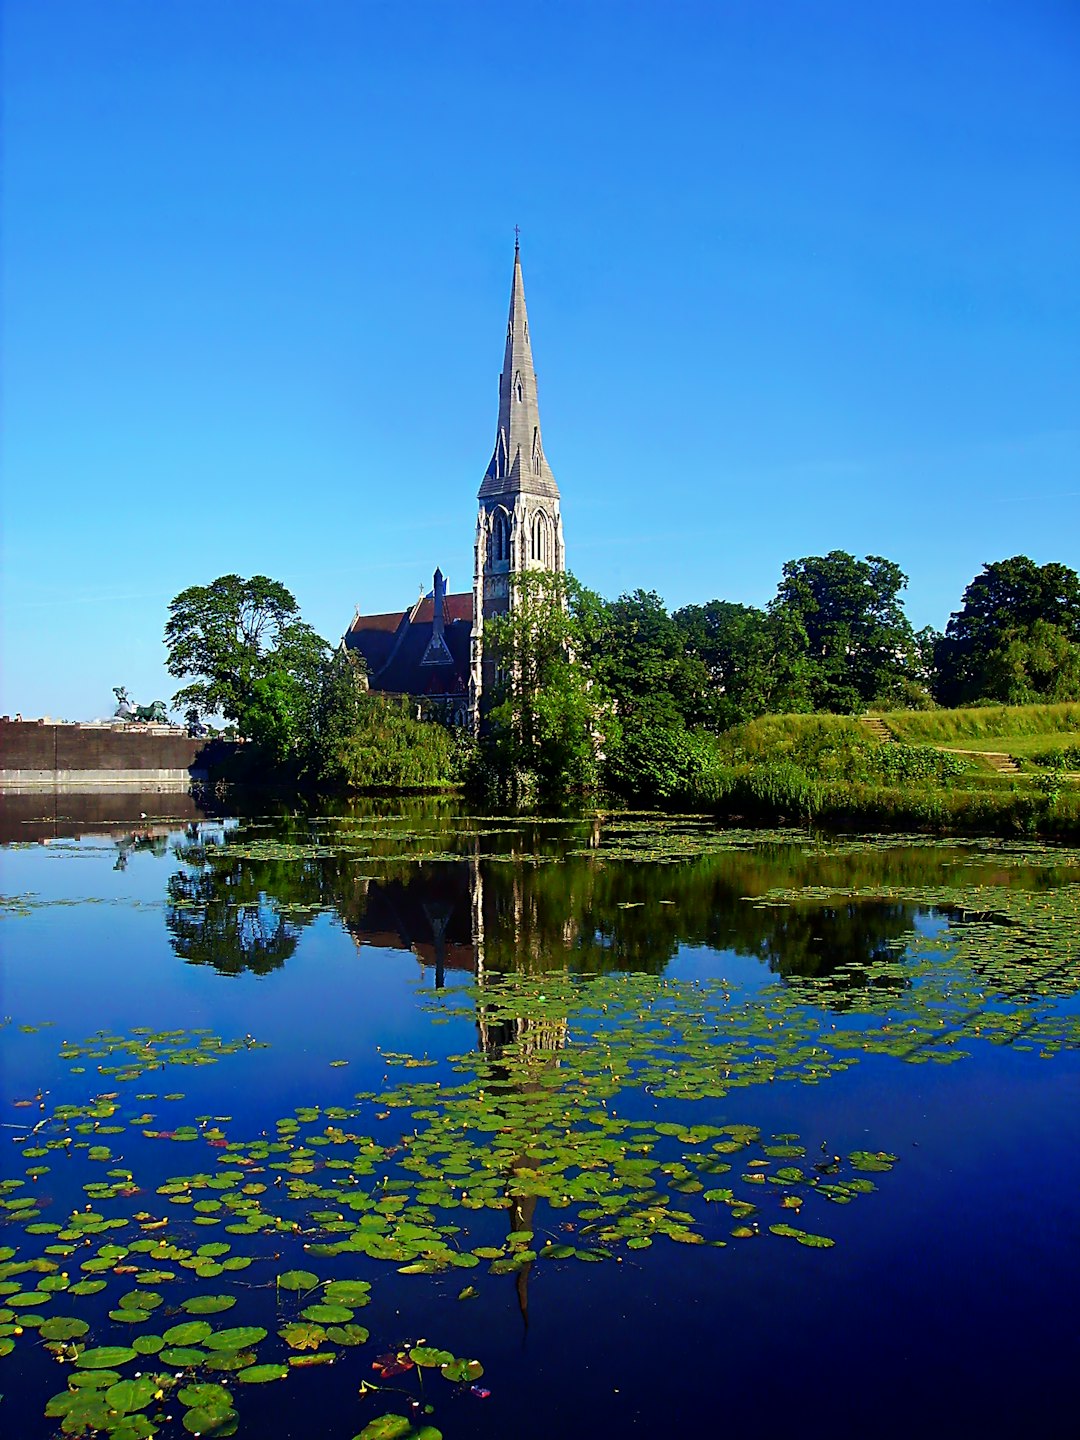 St. Alban's church near body of water under blue and white sky during daytime